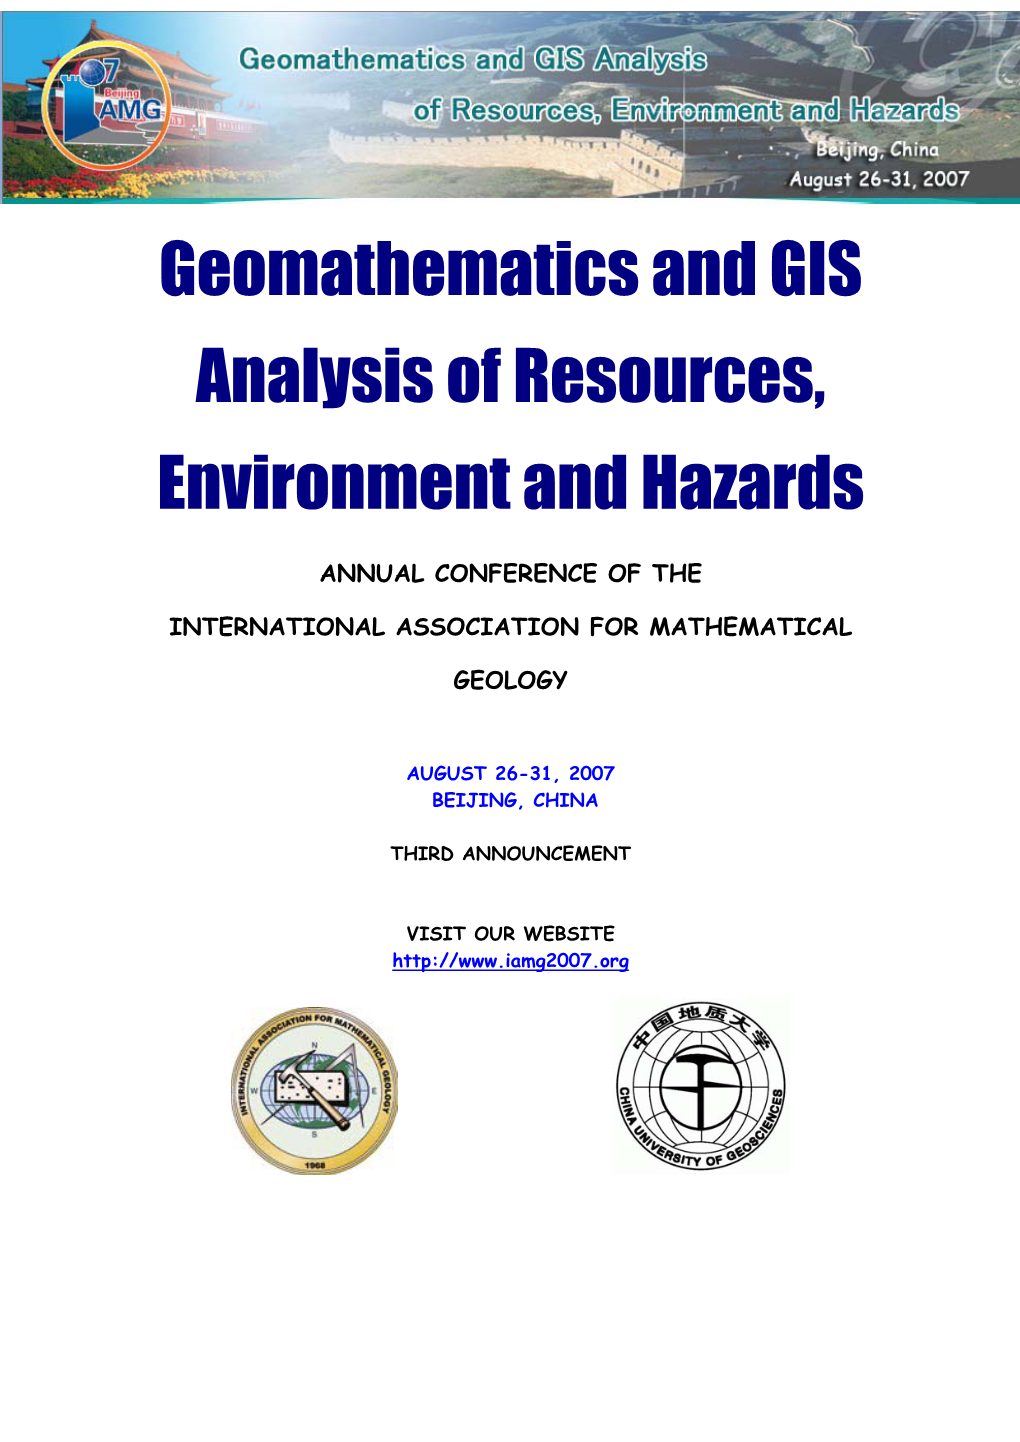 Geomathematics and GIS Analysis of Resources, Environment and Hazards